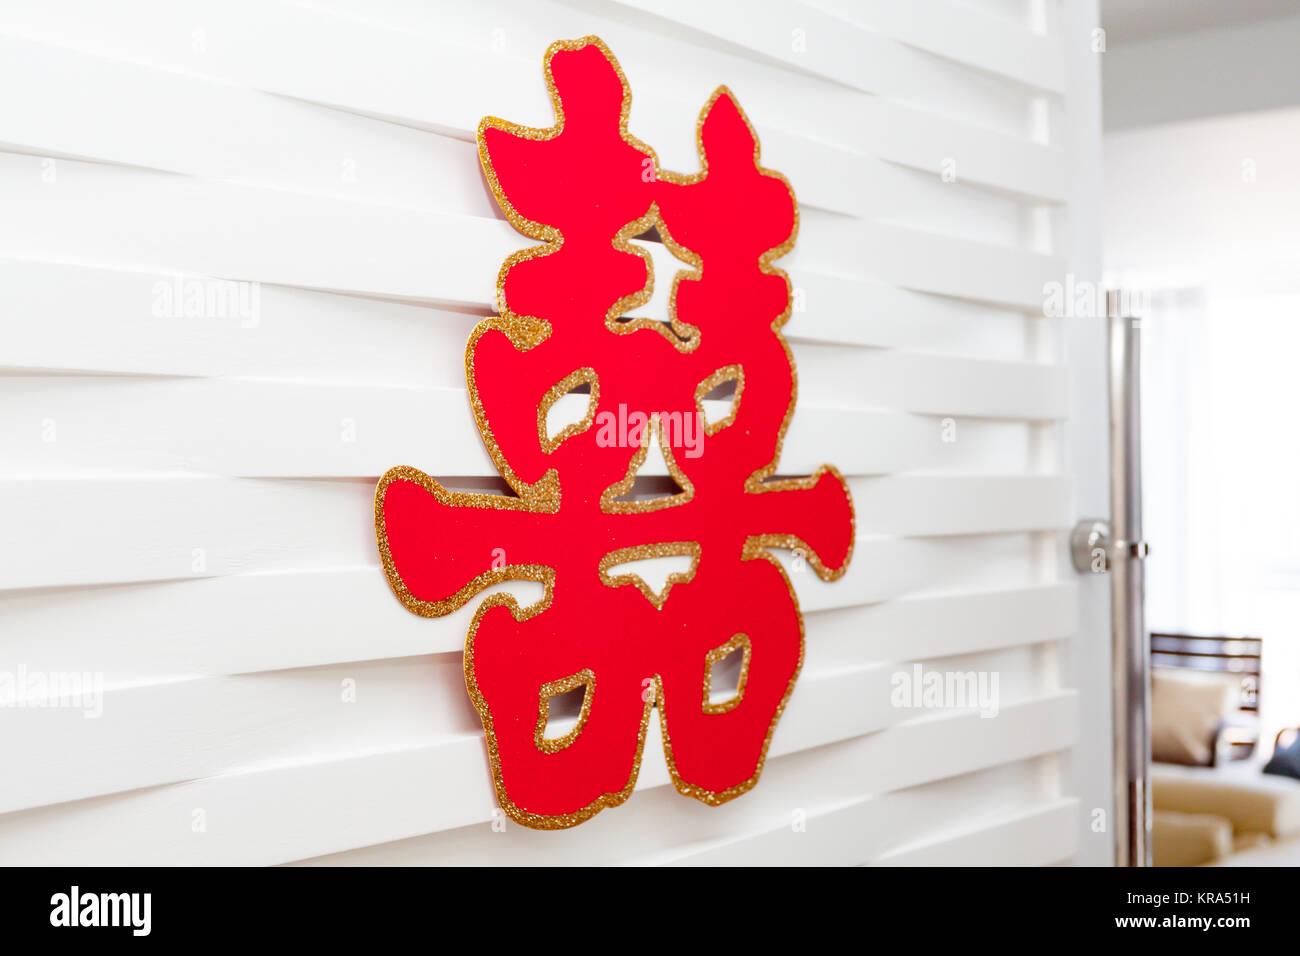 Chinese Character Happy Stock Photos & Chinese Character Happy Stock Images - Alamy1300 x 956